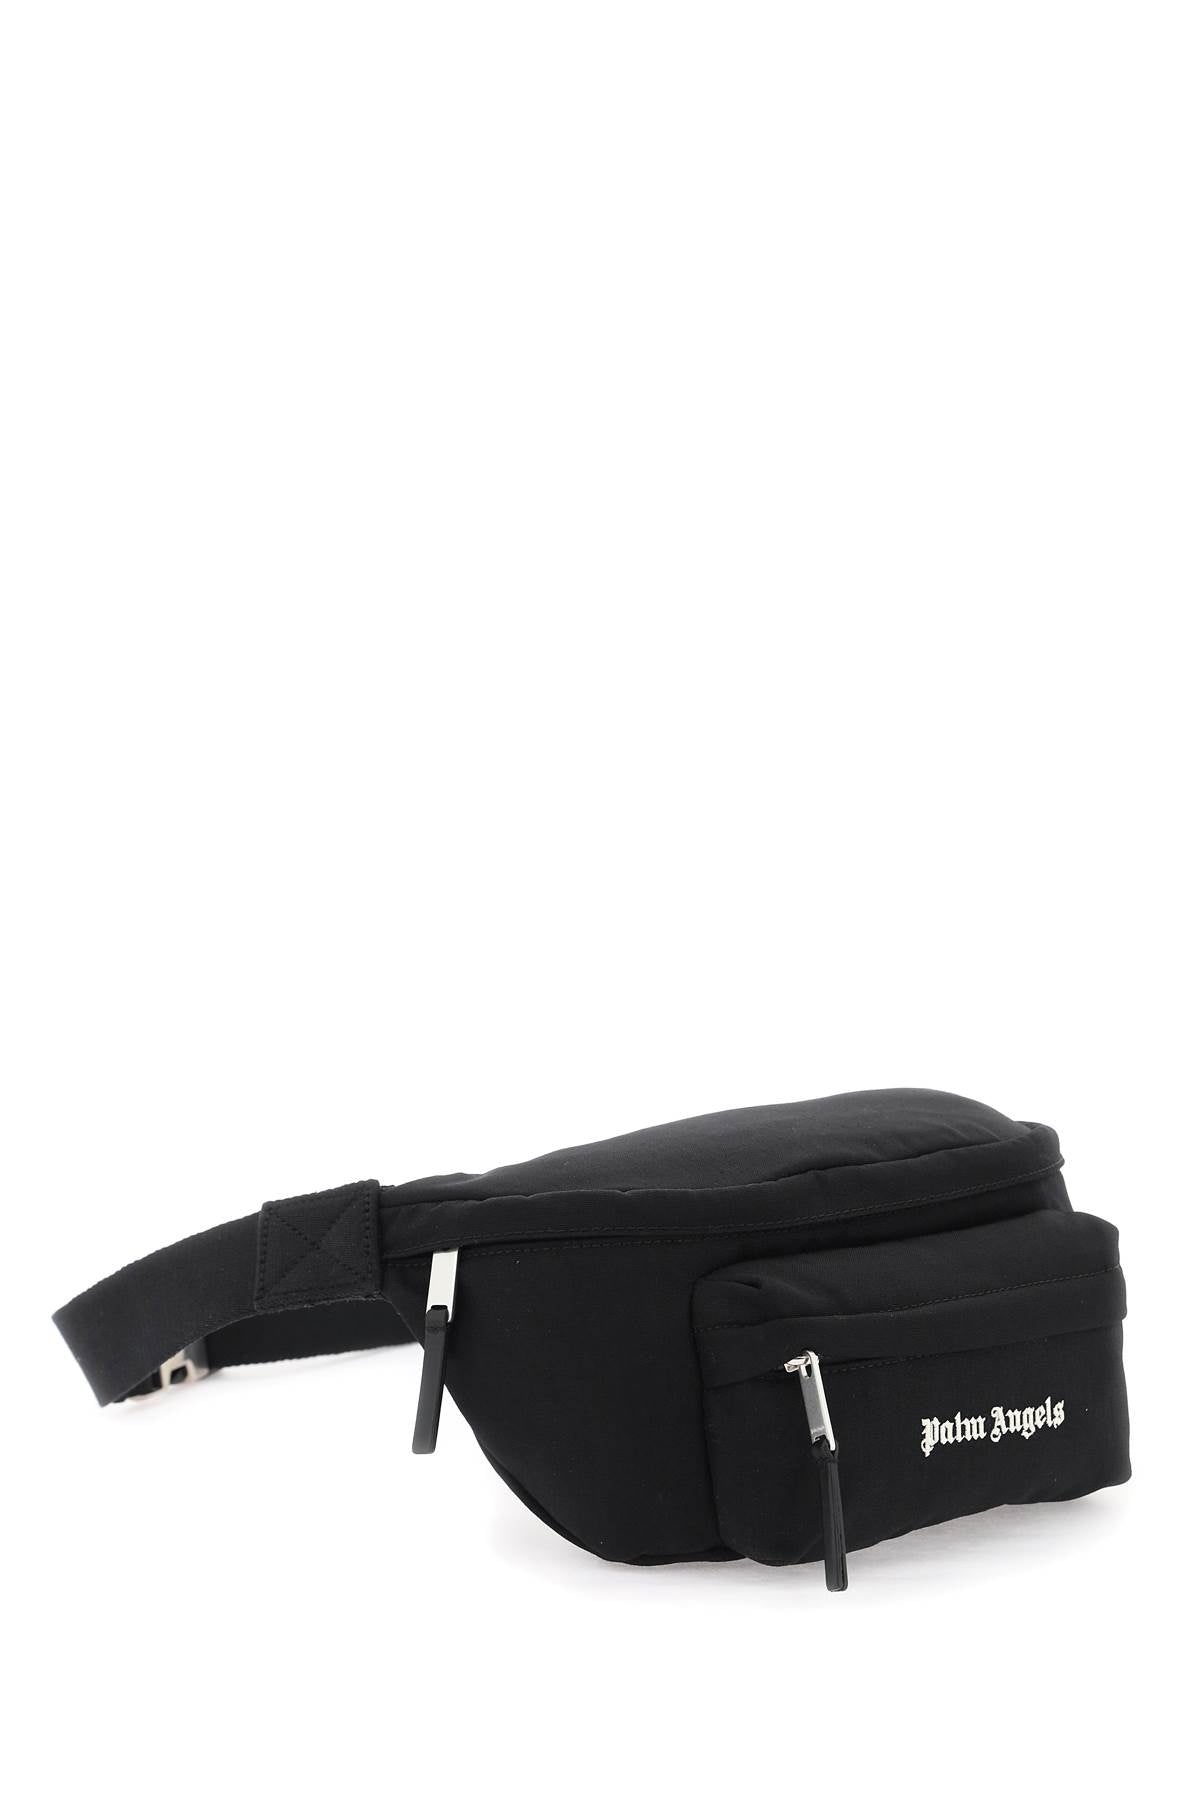 Palm Angels Canvas Waist Bag With Embroidered Logo. Men - 3